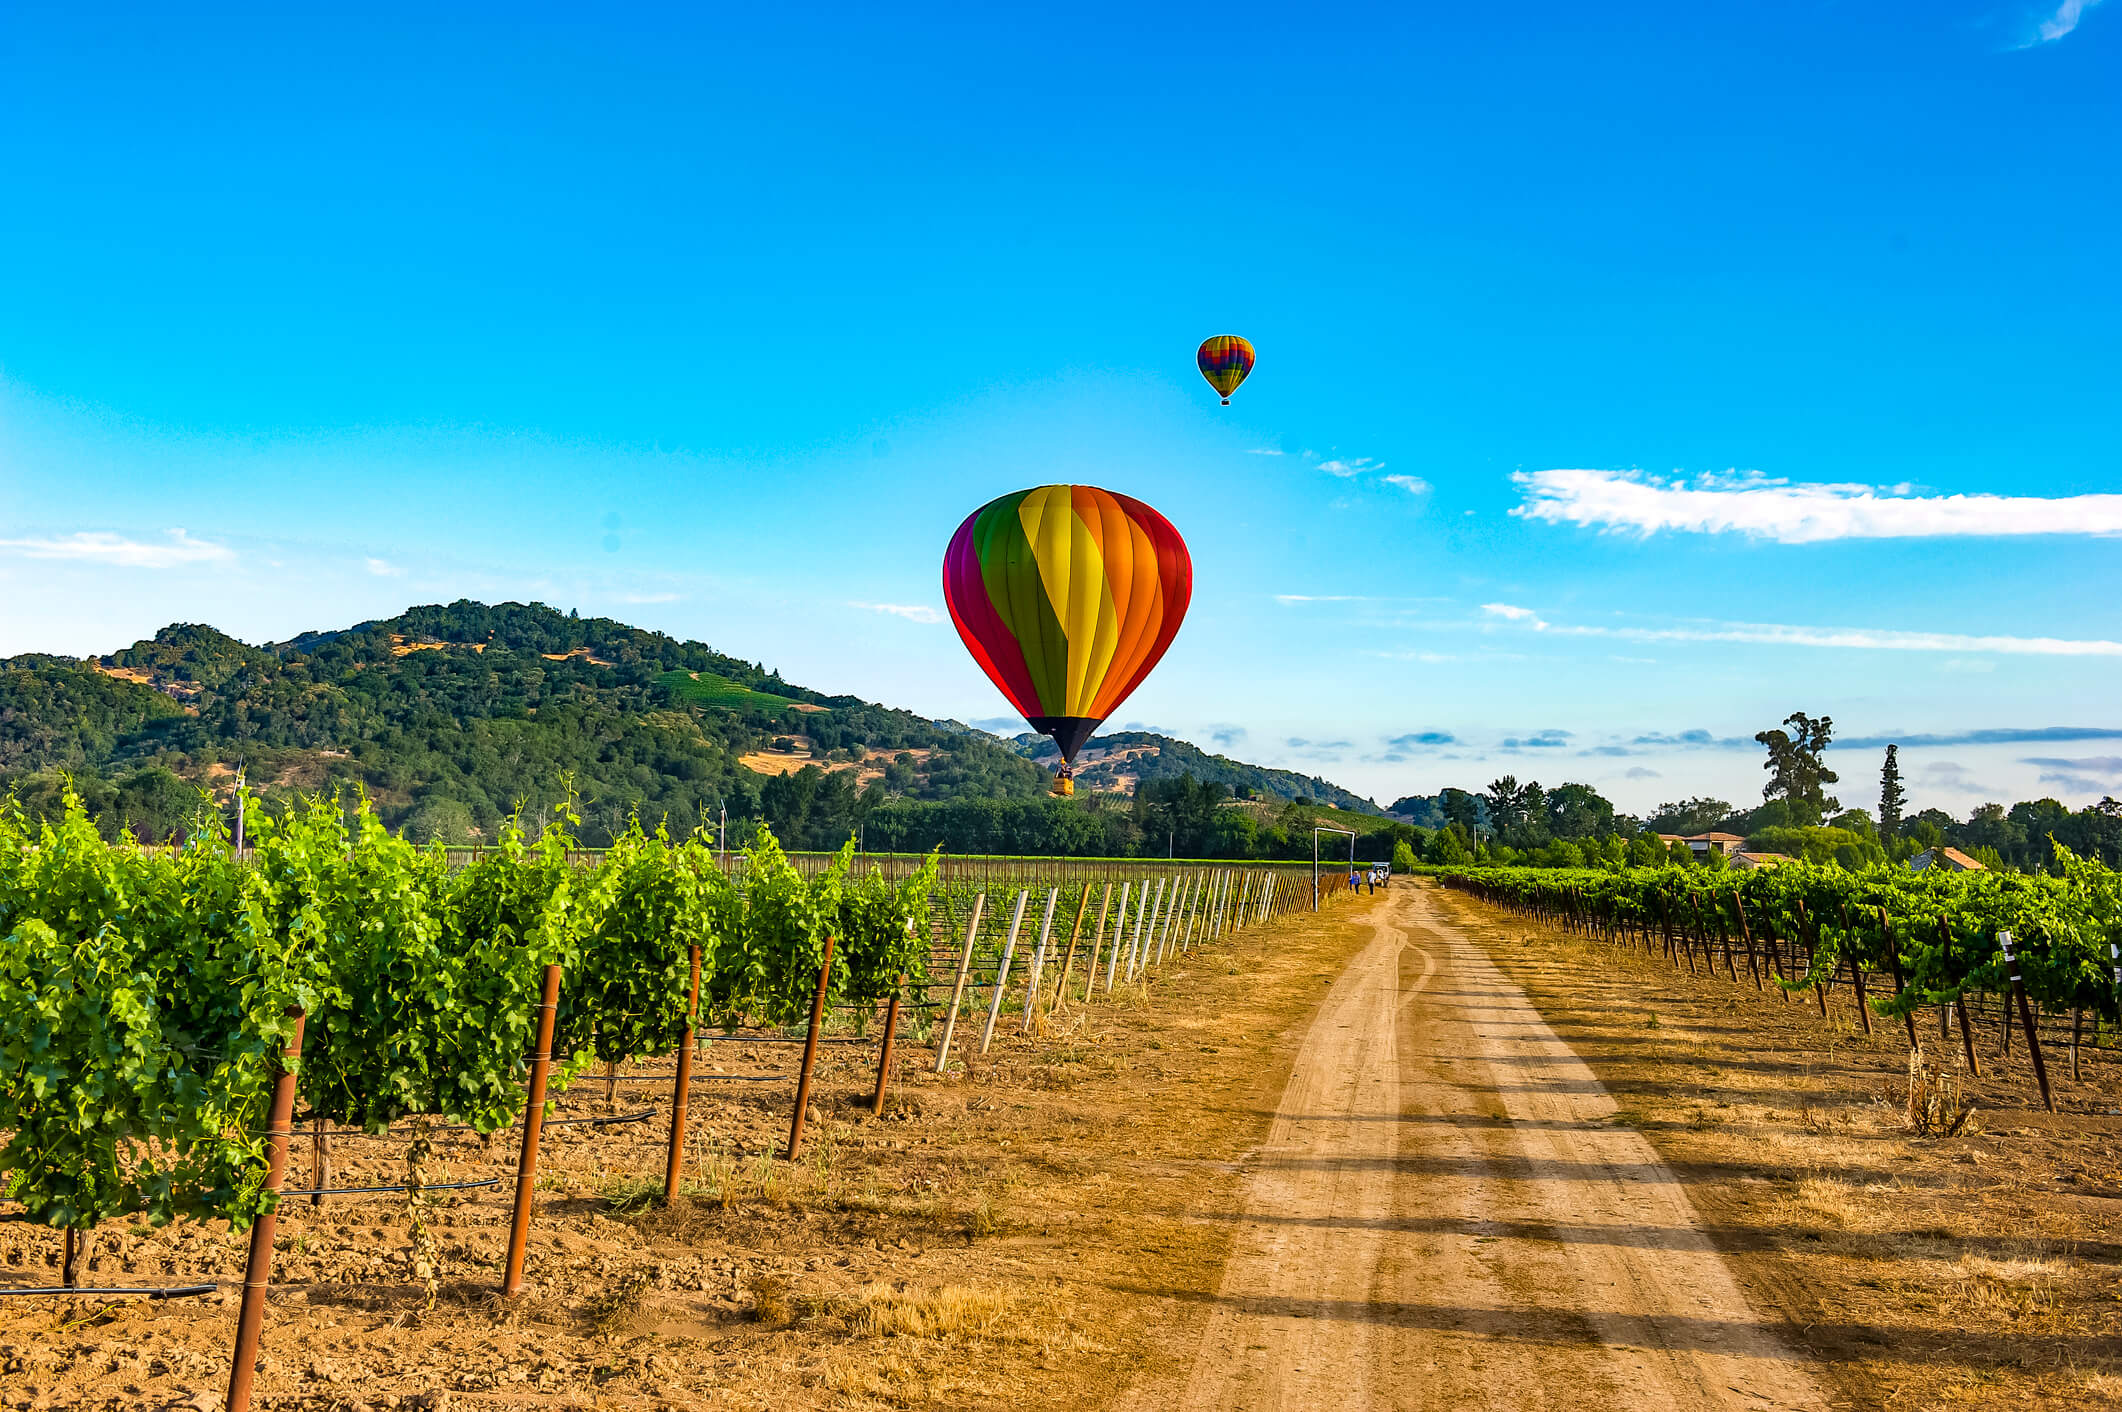 Hot air balloon flying over vineyard with mountains in the background